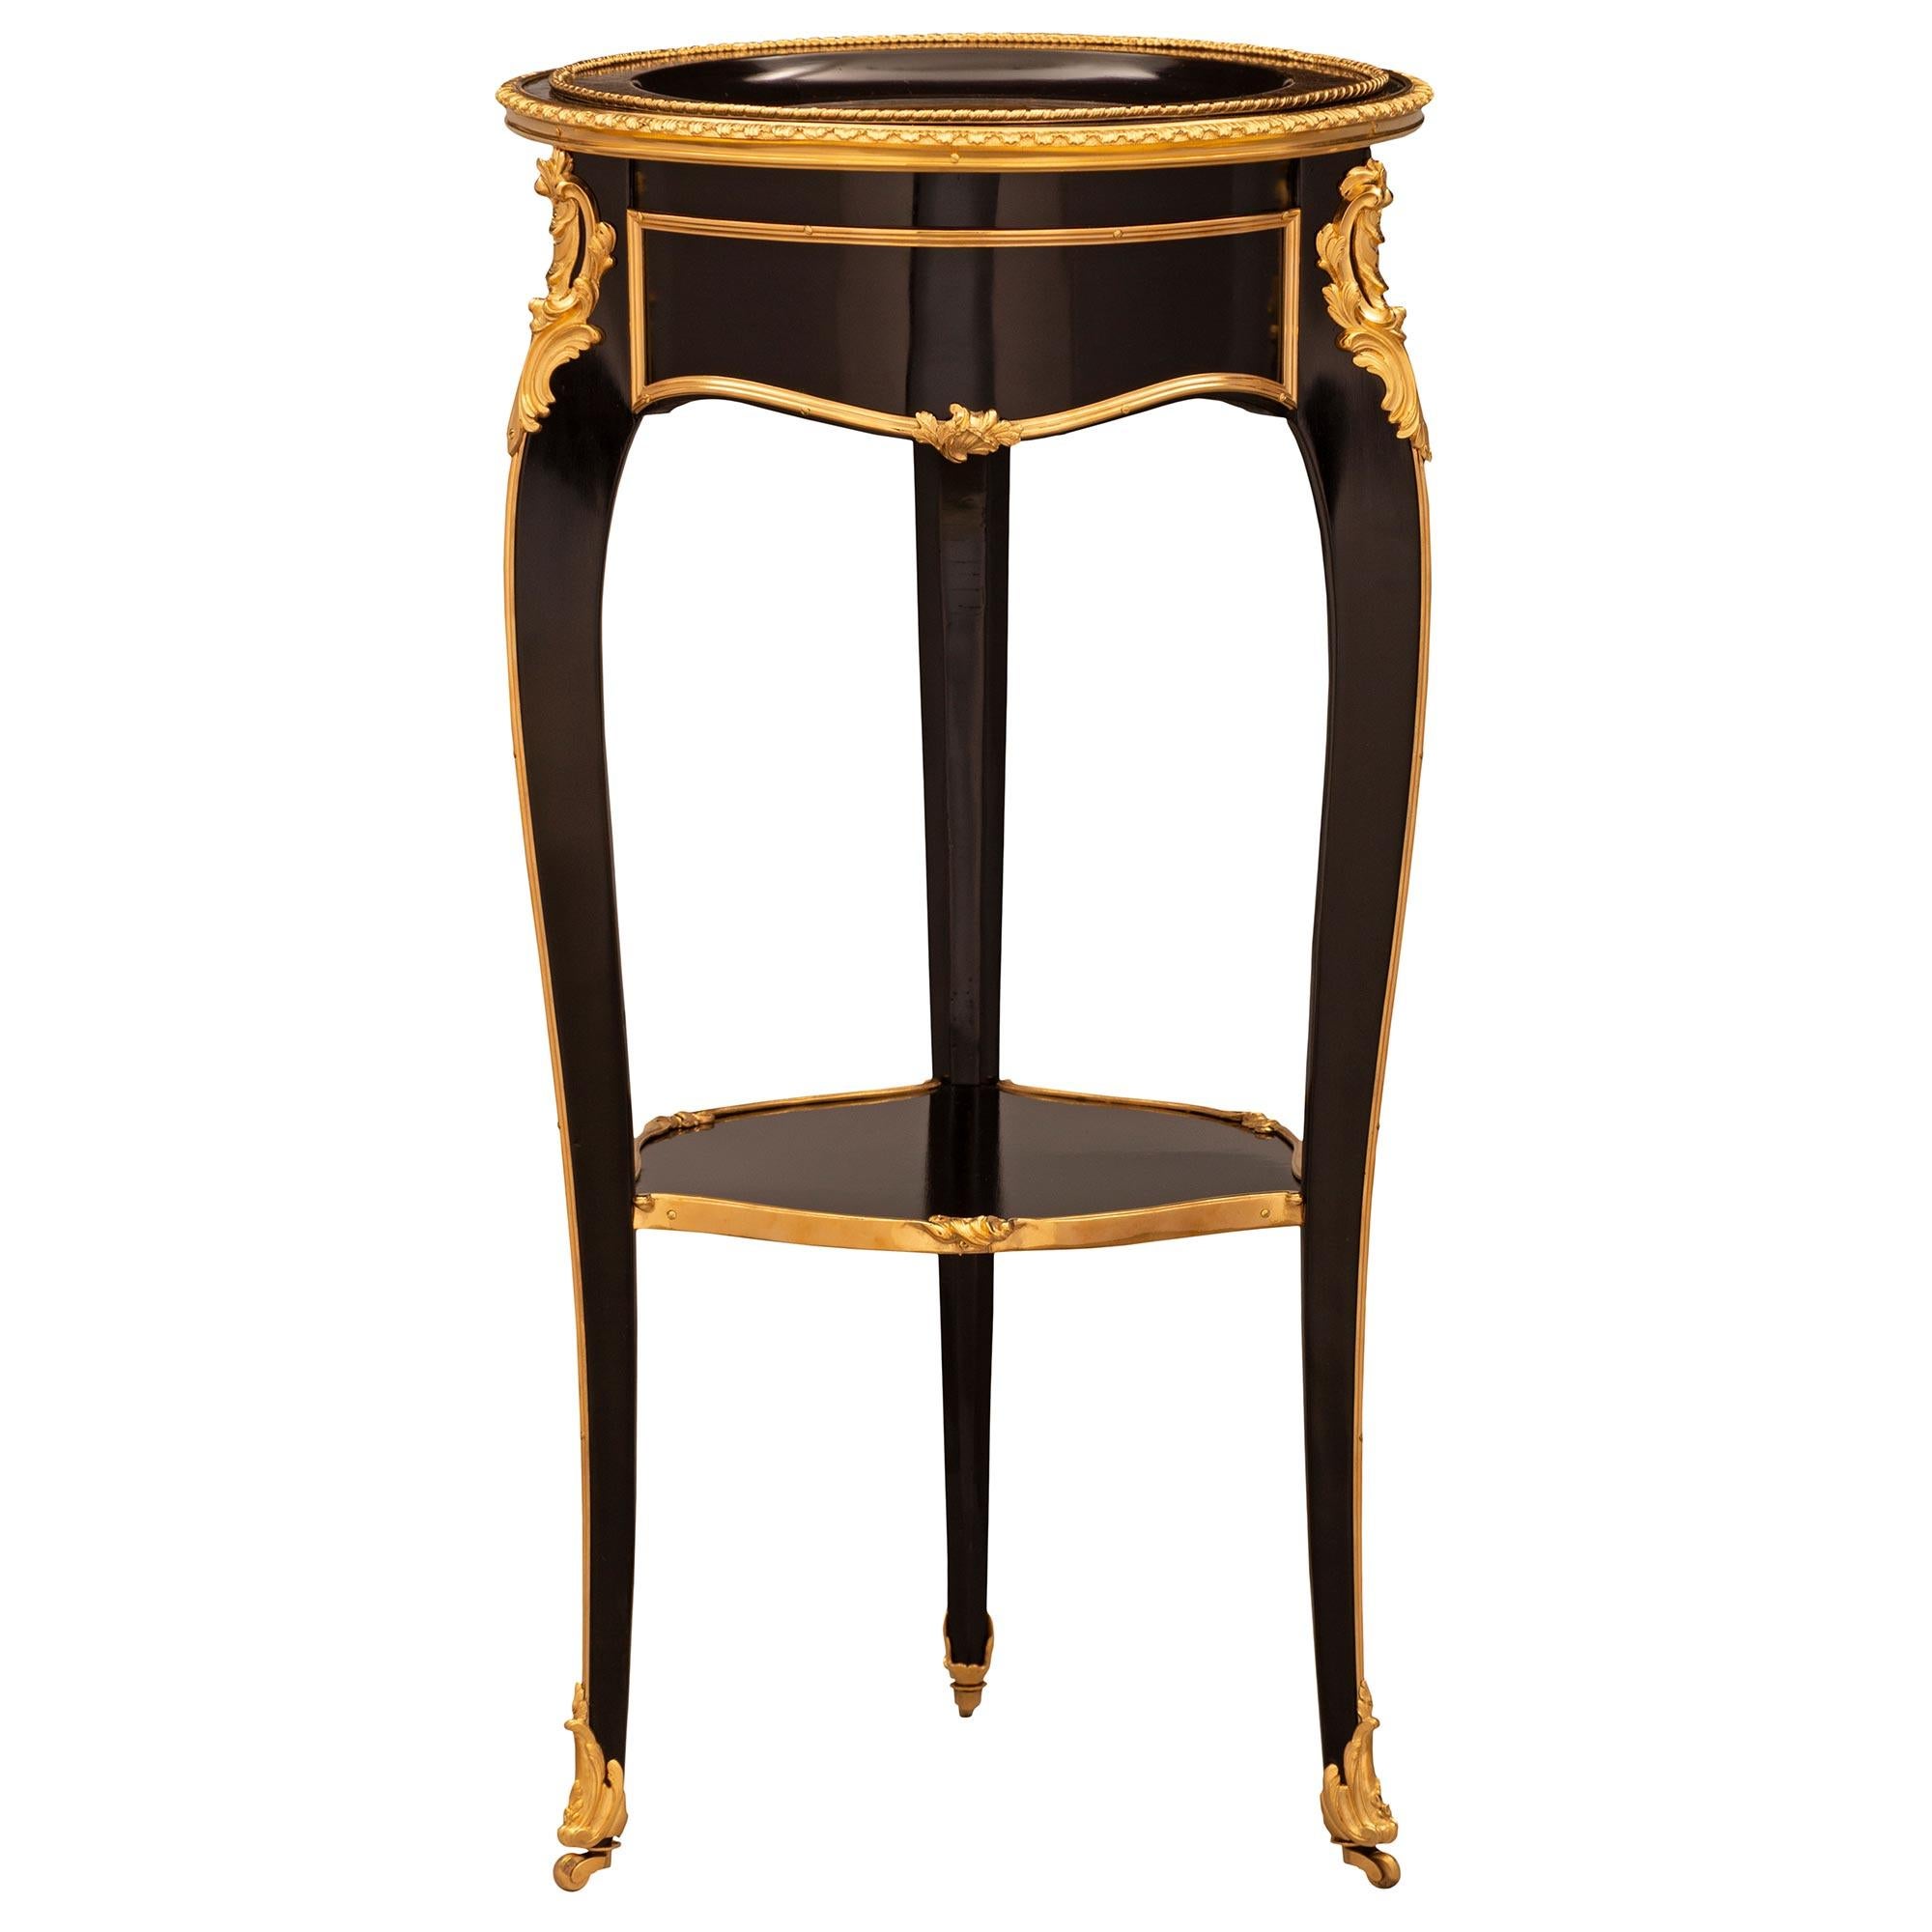 French 19th Century Napoleon III Period Japanese Black Lacquer Side Table In Good Condition For Sale In West Palm Beach, FL